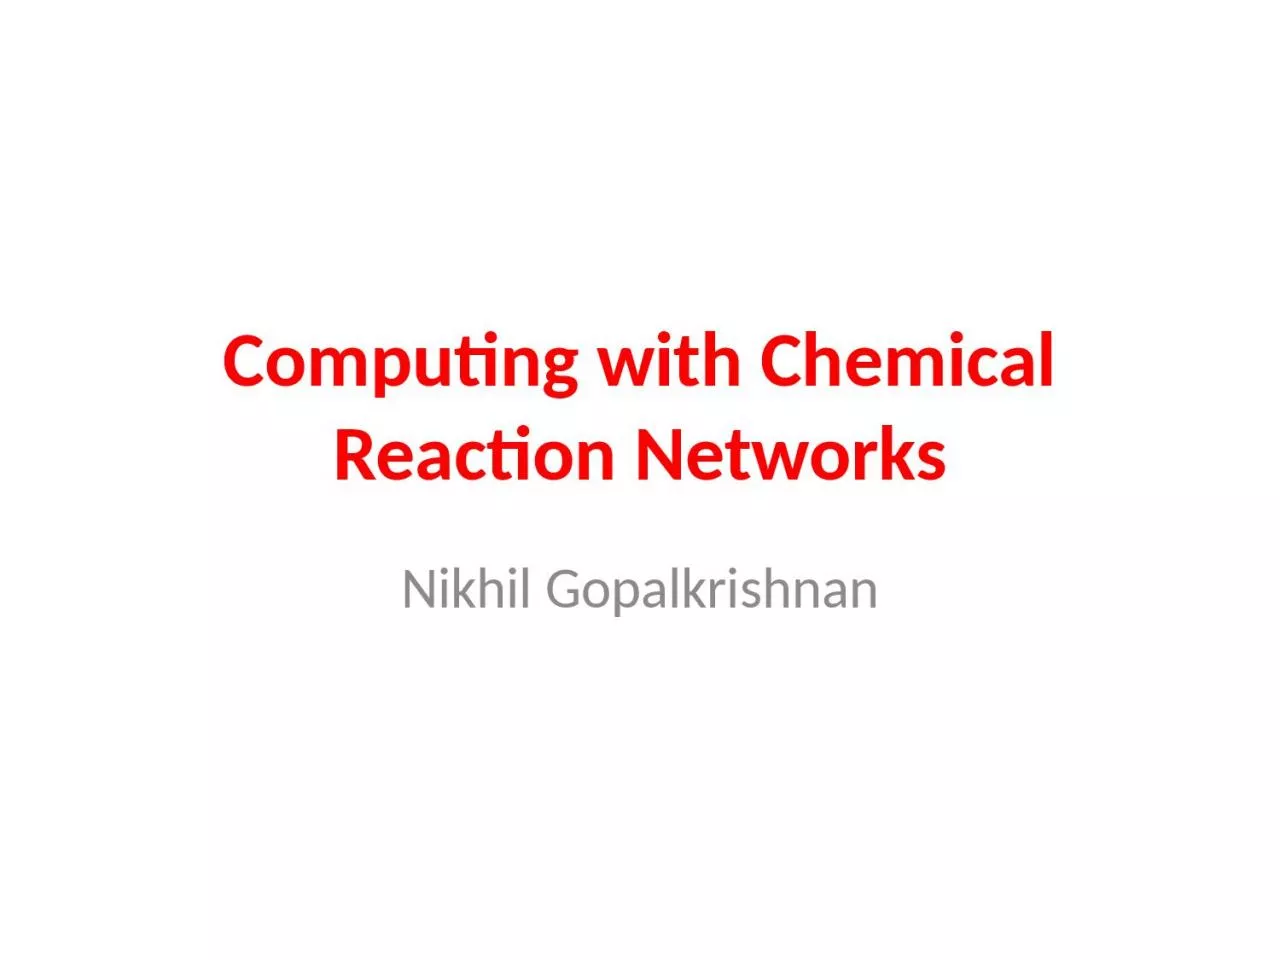 Computing with Chemical Reaction Networks